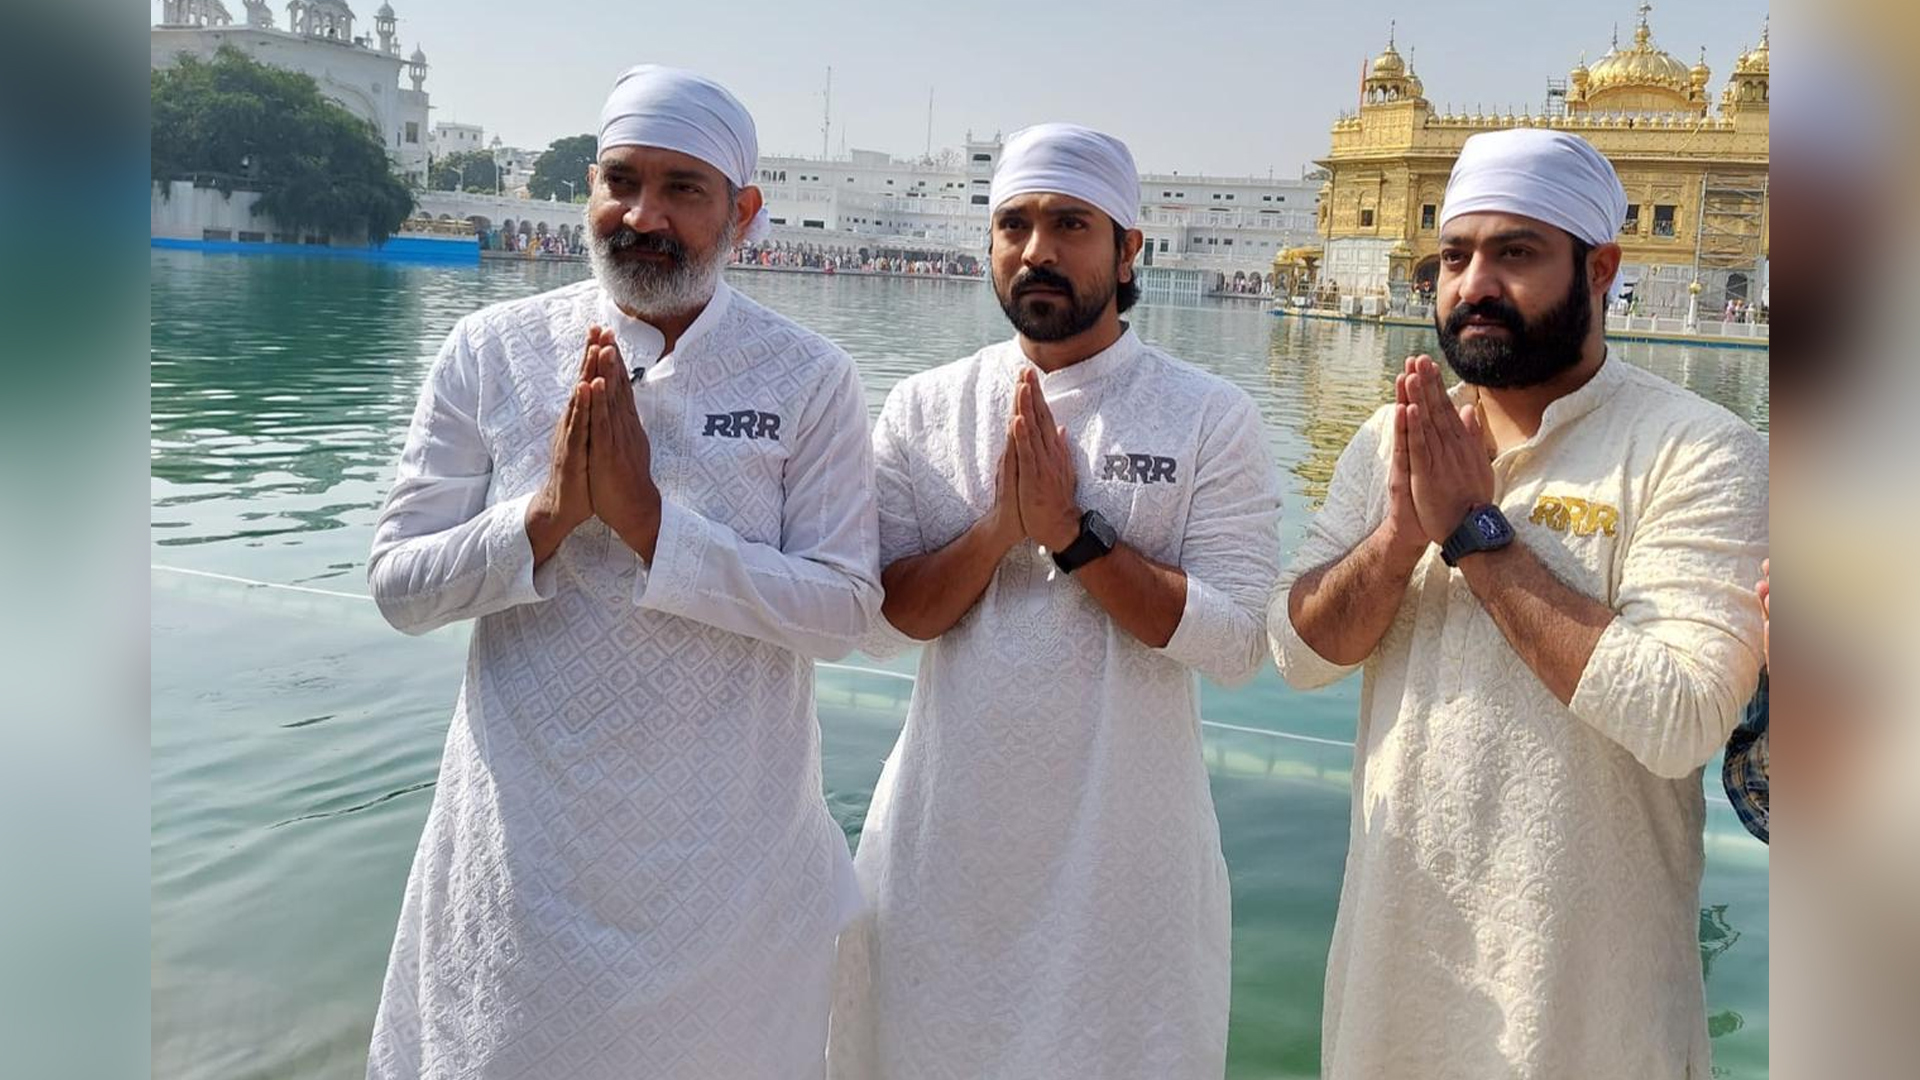 ‘RRR’ team visits Golden temple in Amritsar to seek blessings for SS Rajamouli’s magnum opus!